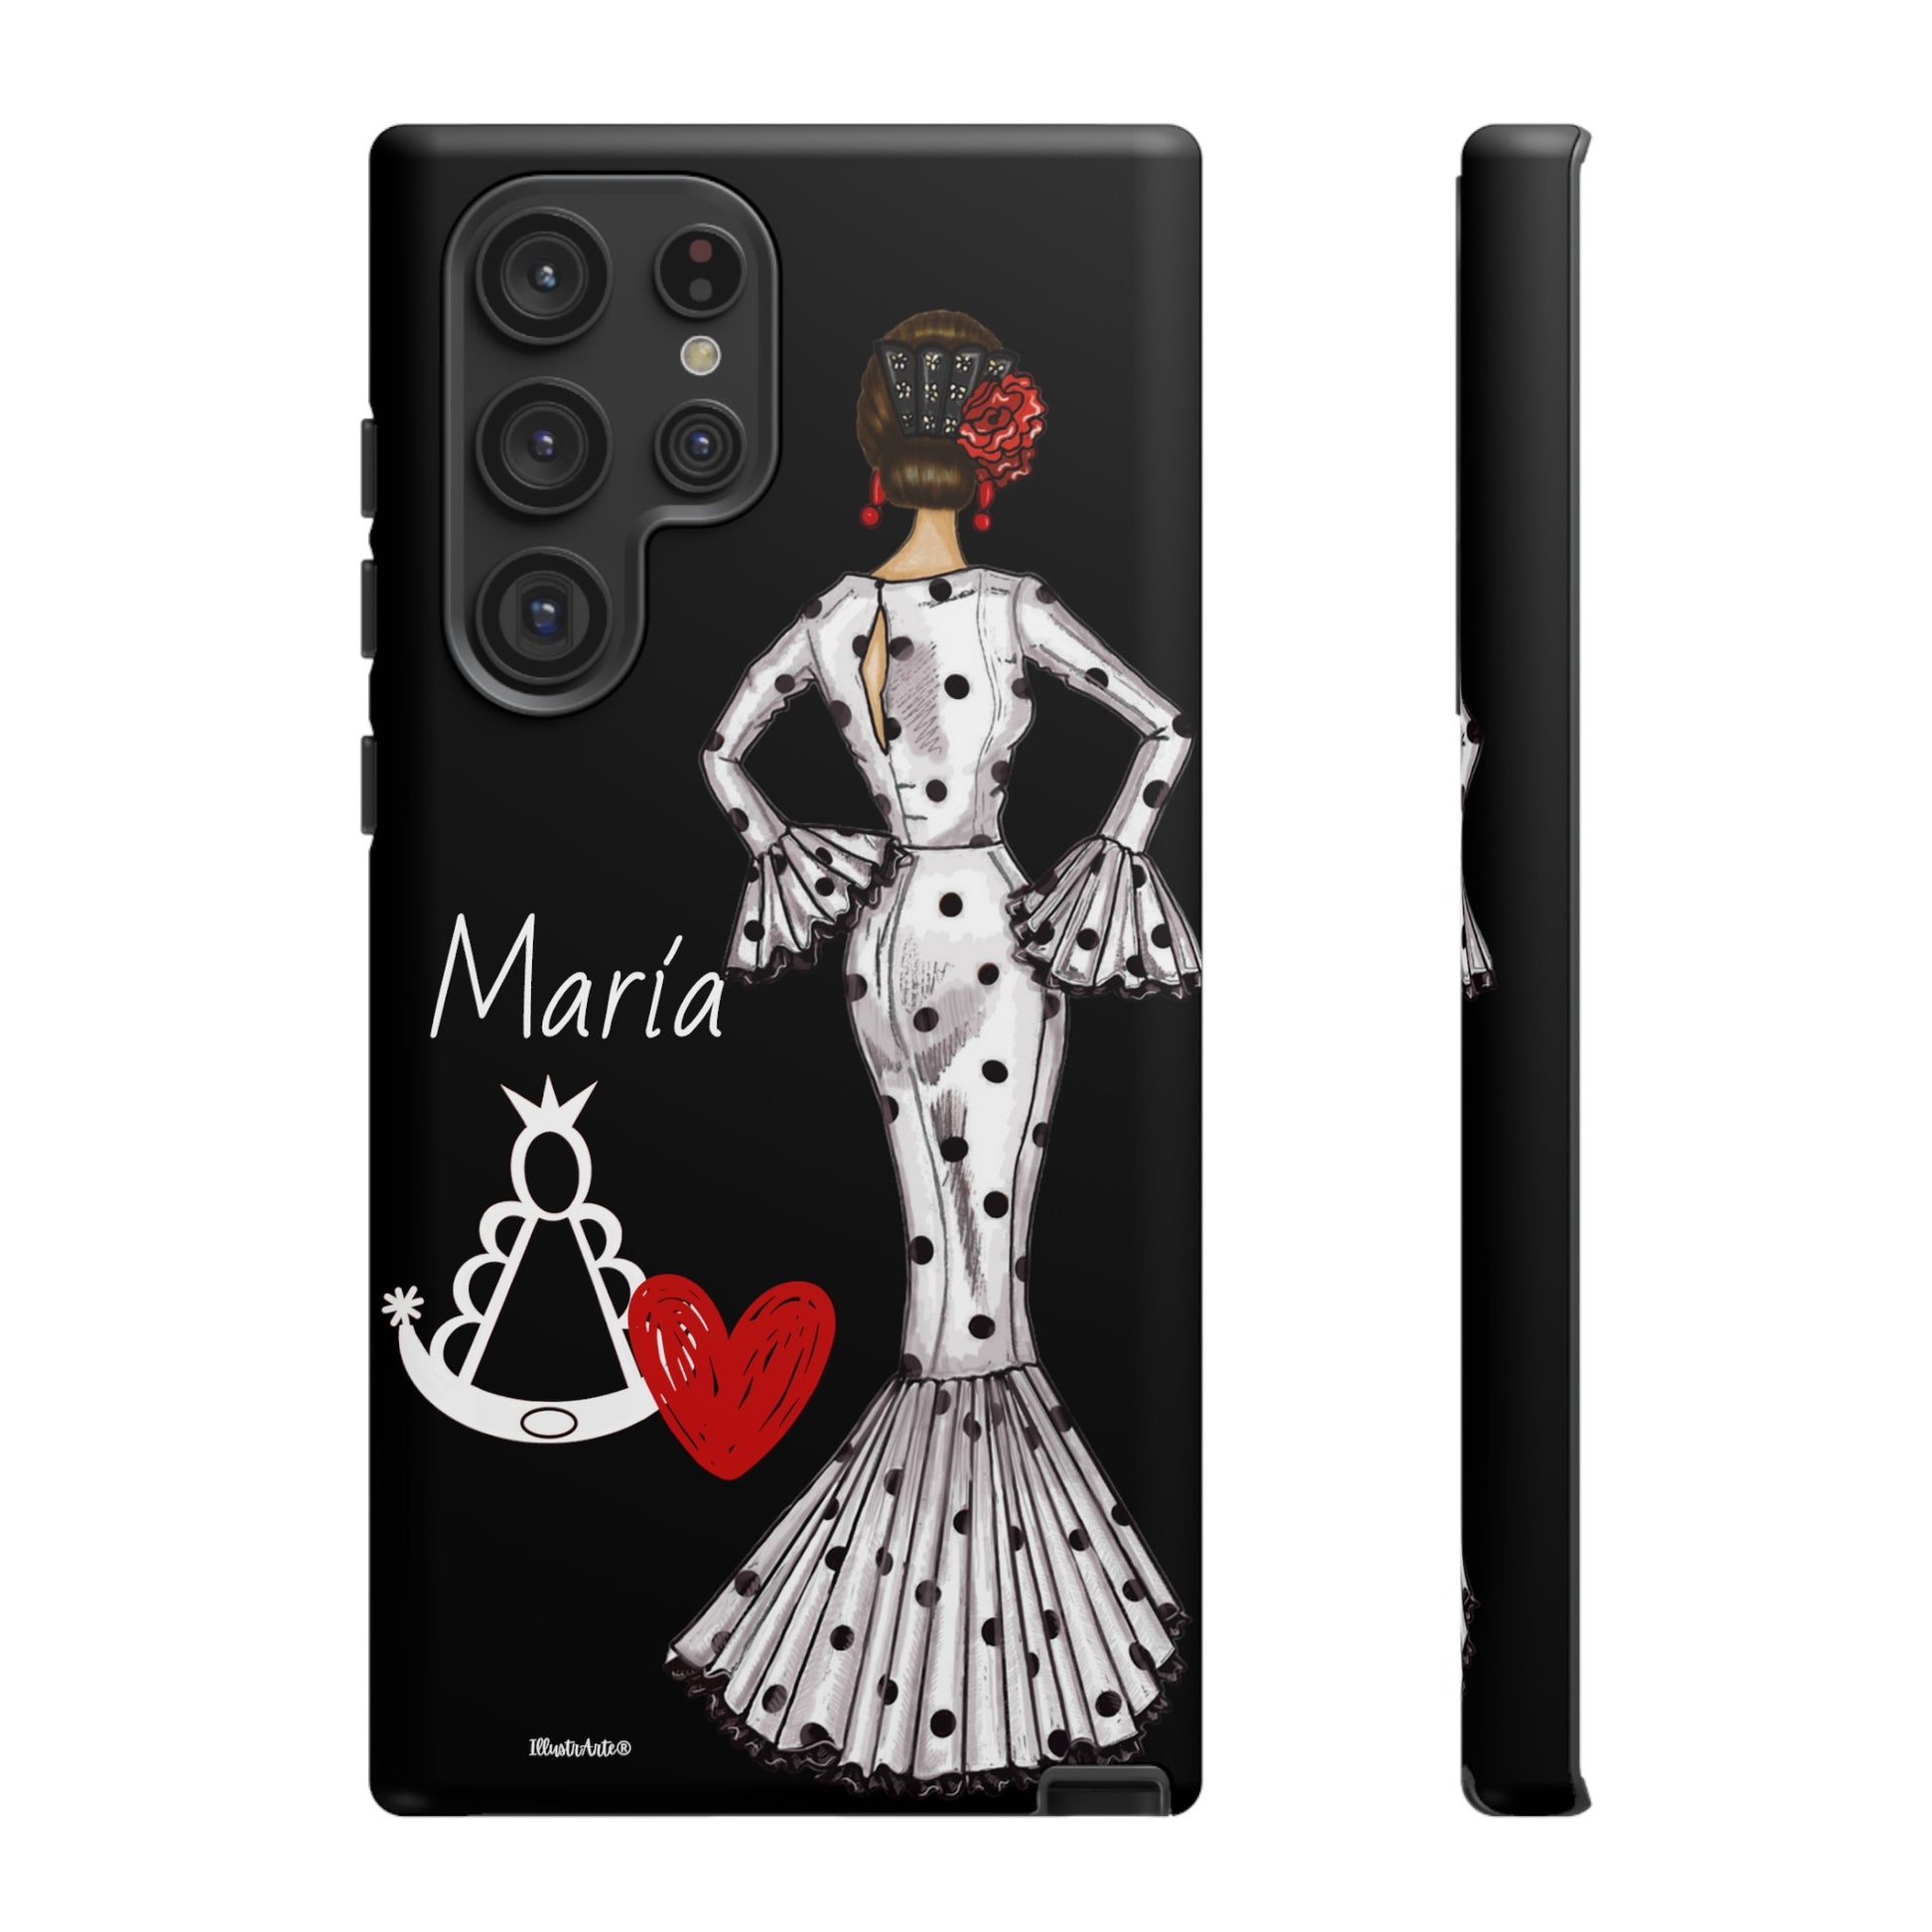 a black and white phone case with a woman in a polka dot dress